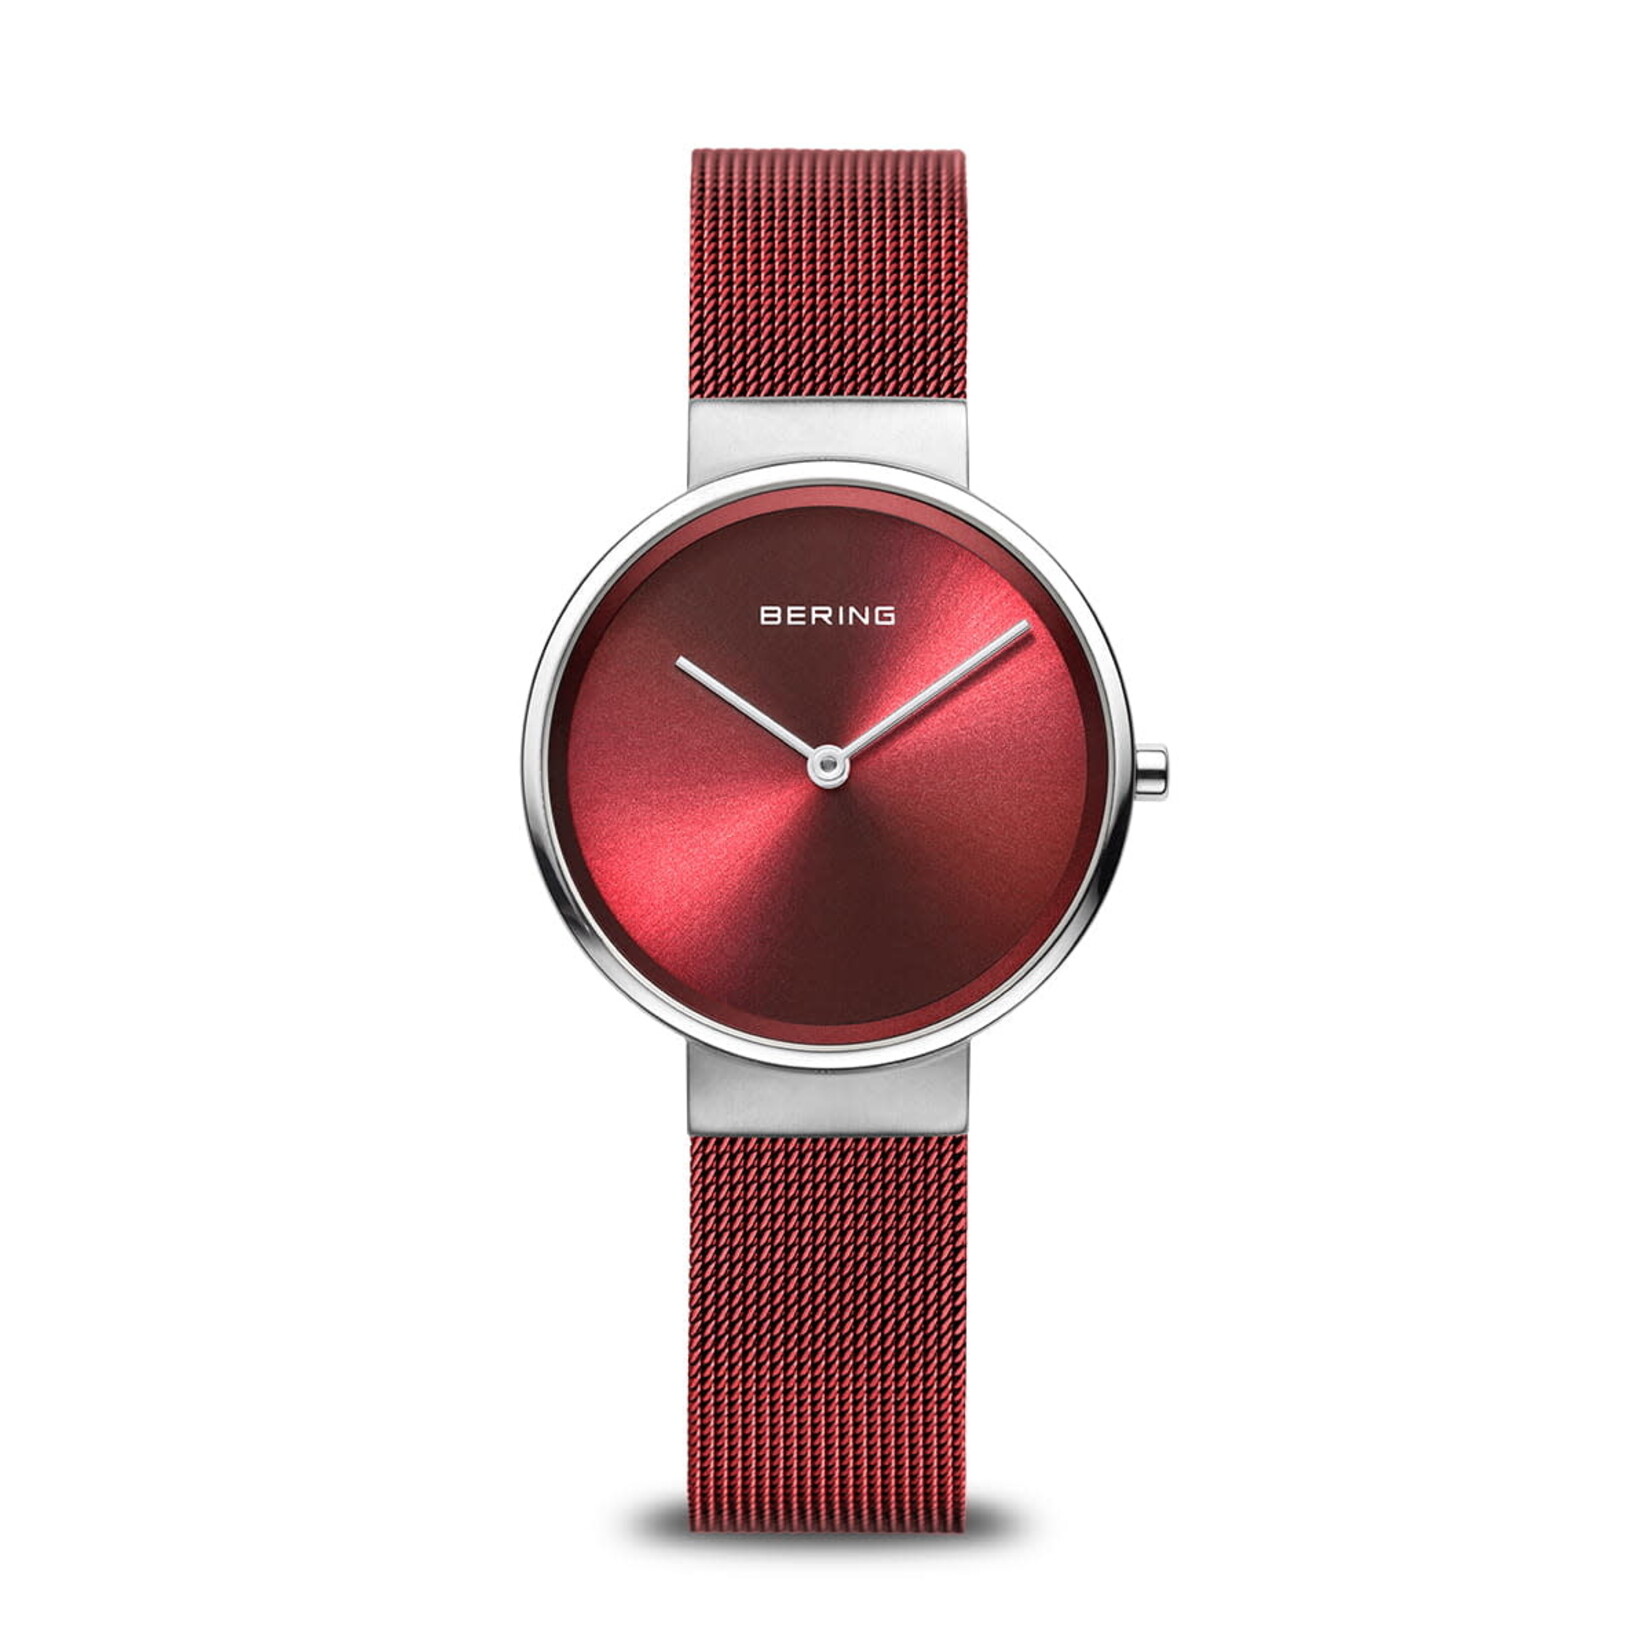 Bering Large Face Crimson and Silver Watch